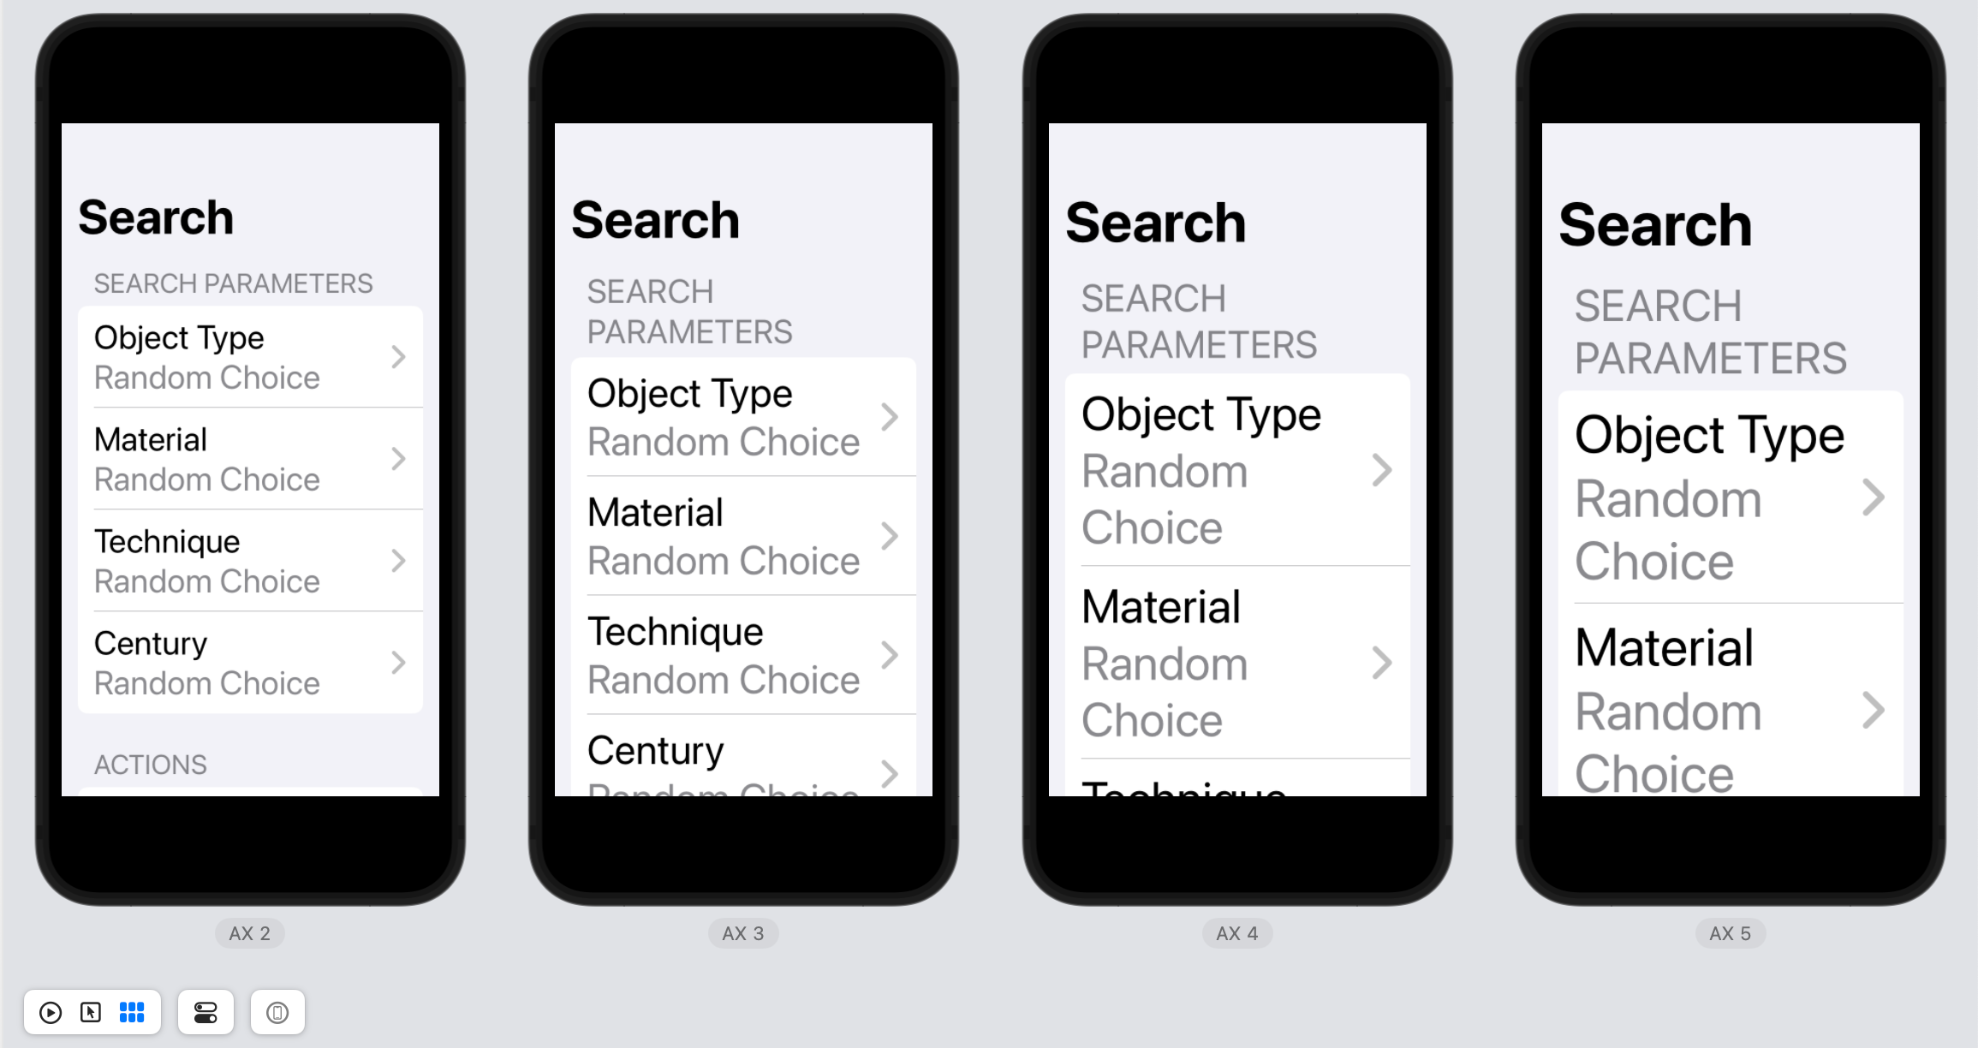 The same search interface adjusting itself to larger and larger fonts.